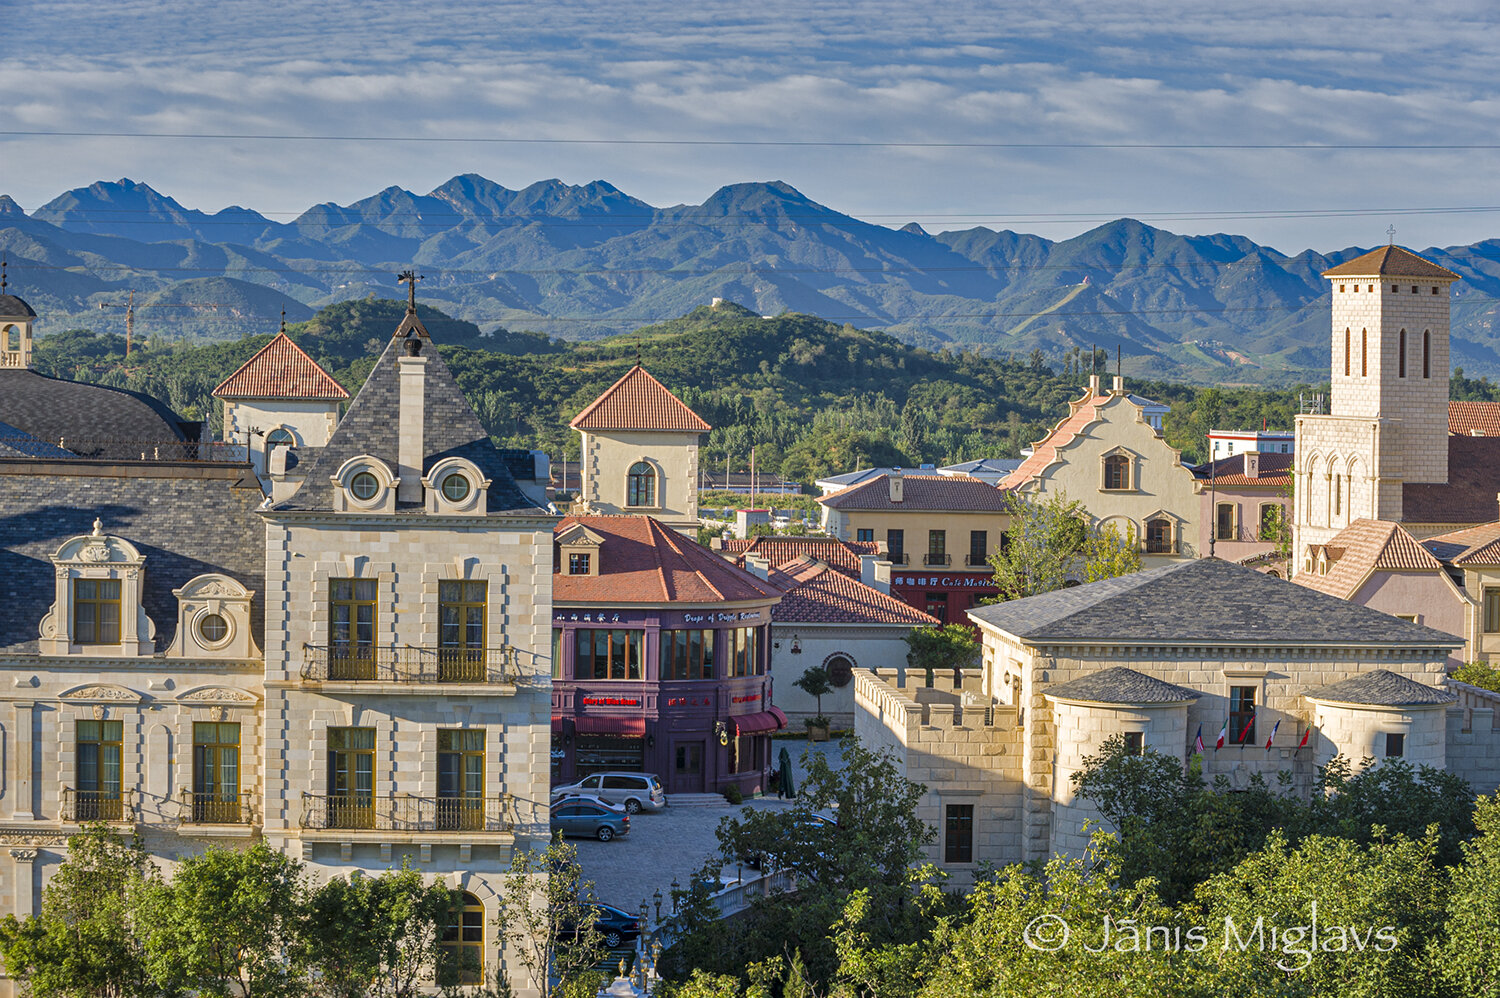 European-style village at Chateau Changyu AFIP Global winery